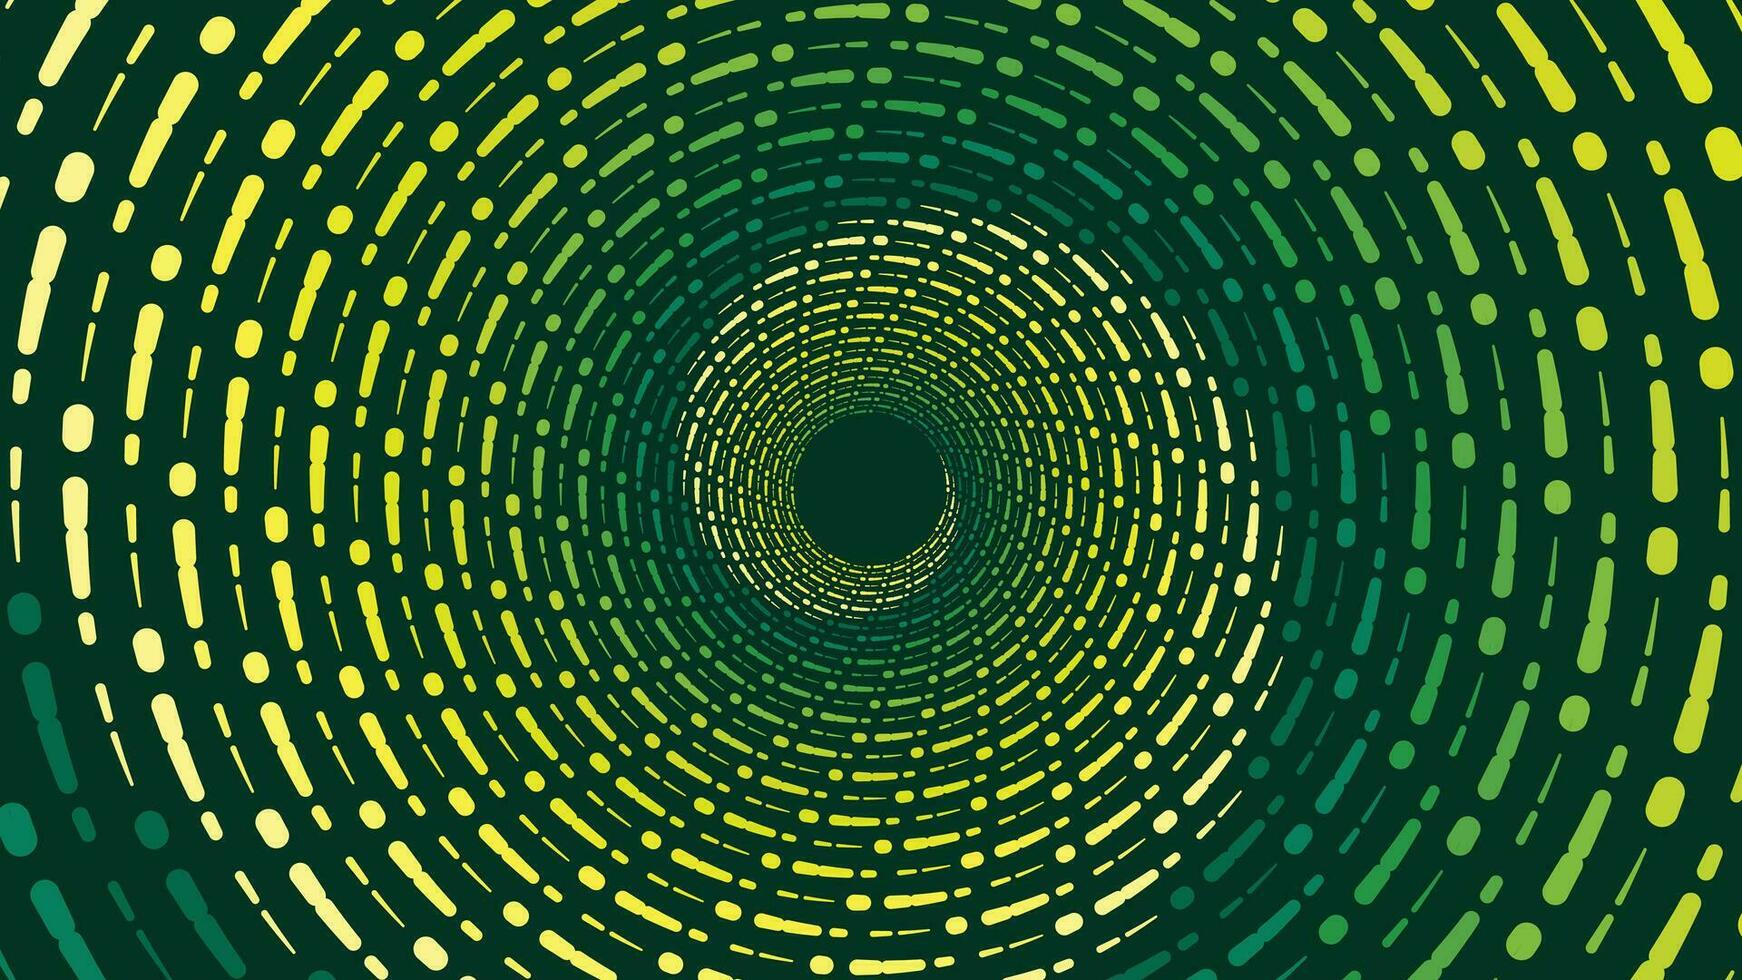 Abstract spiral round vortex style background. This simple background can be used as a banner or wallpaper. vector